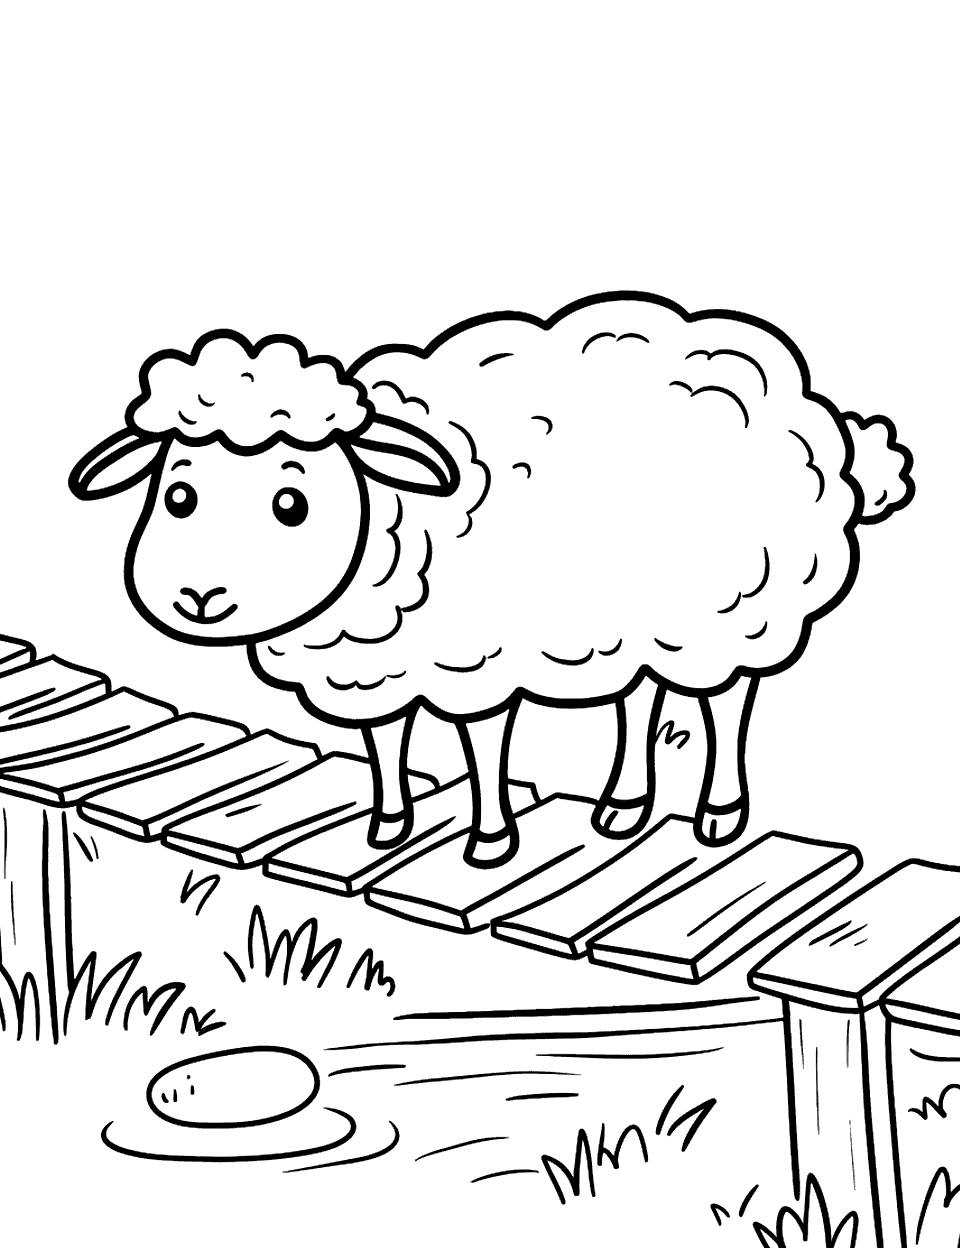 Sheep Crossing a Wooden Bridge Coloring Page - A sheep cautiously crossing a small wooden bridge over a stream.